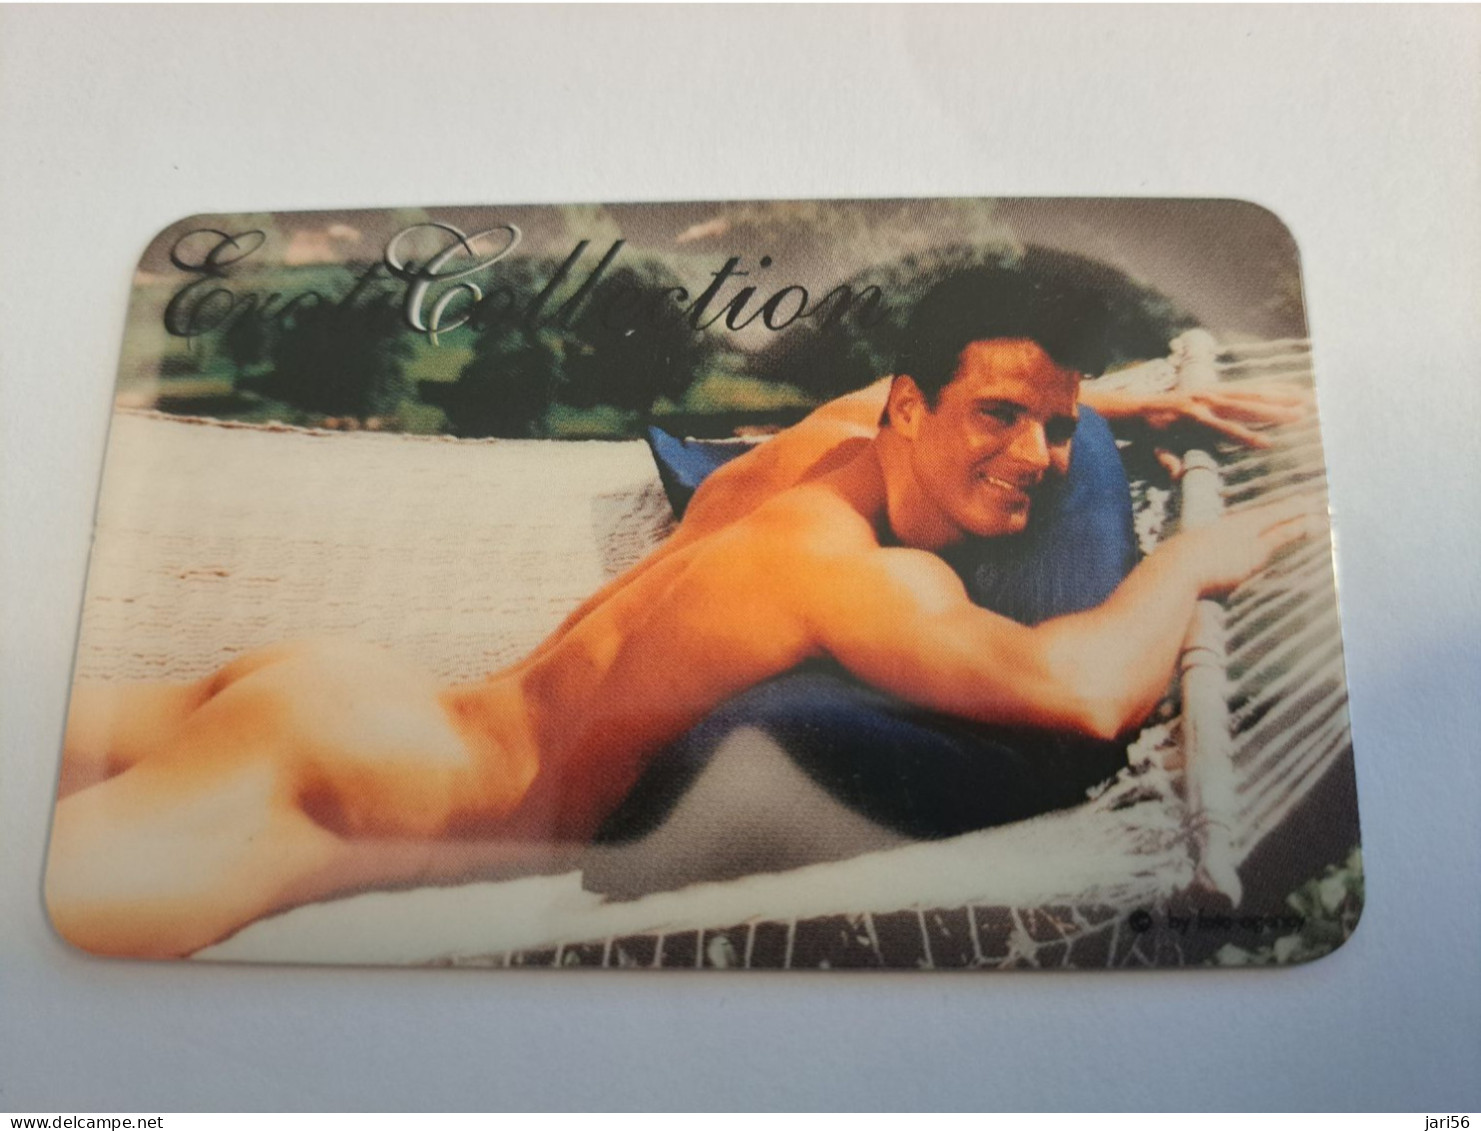 GREAT BRITAIN /20 UNITS / EROTIC COLLECTION / MODEL / NAKED MAN  / (date 09/00)  PREPAID CARD / MINT  **15905** - Verzamelingen